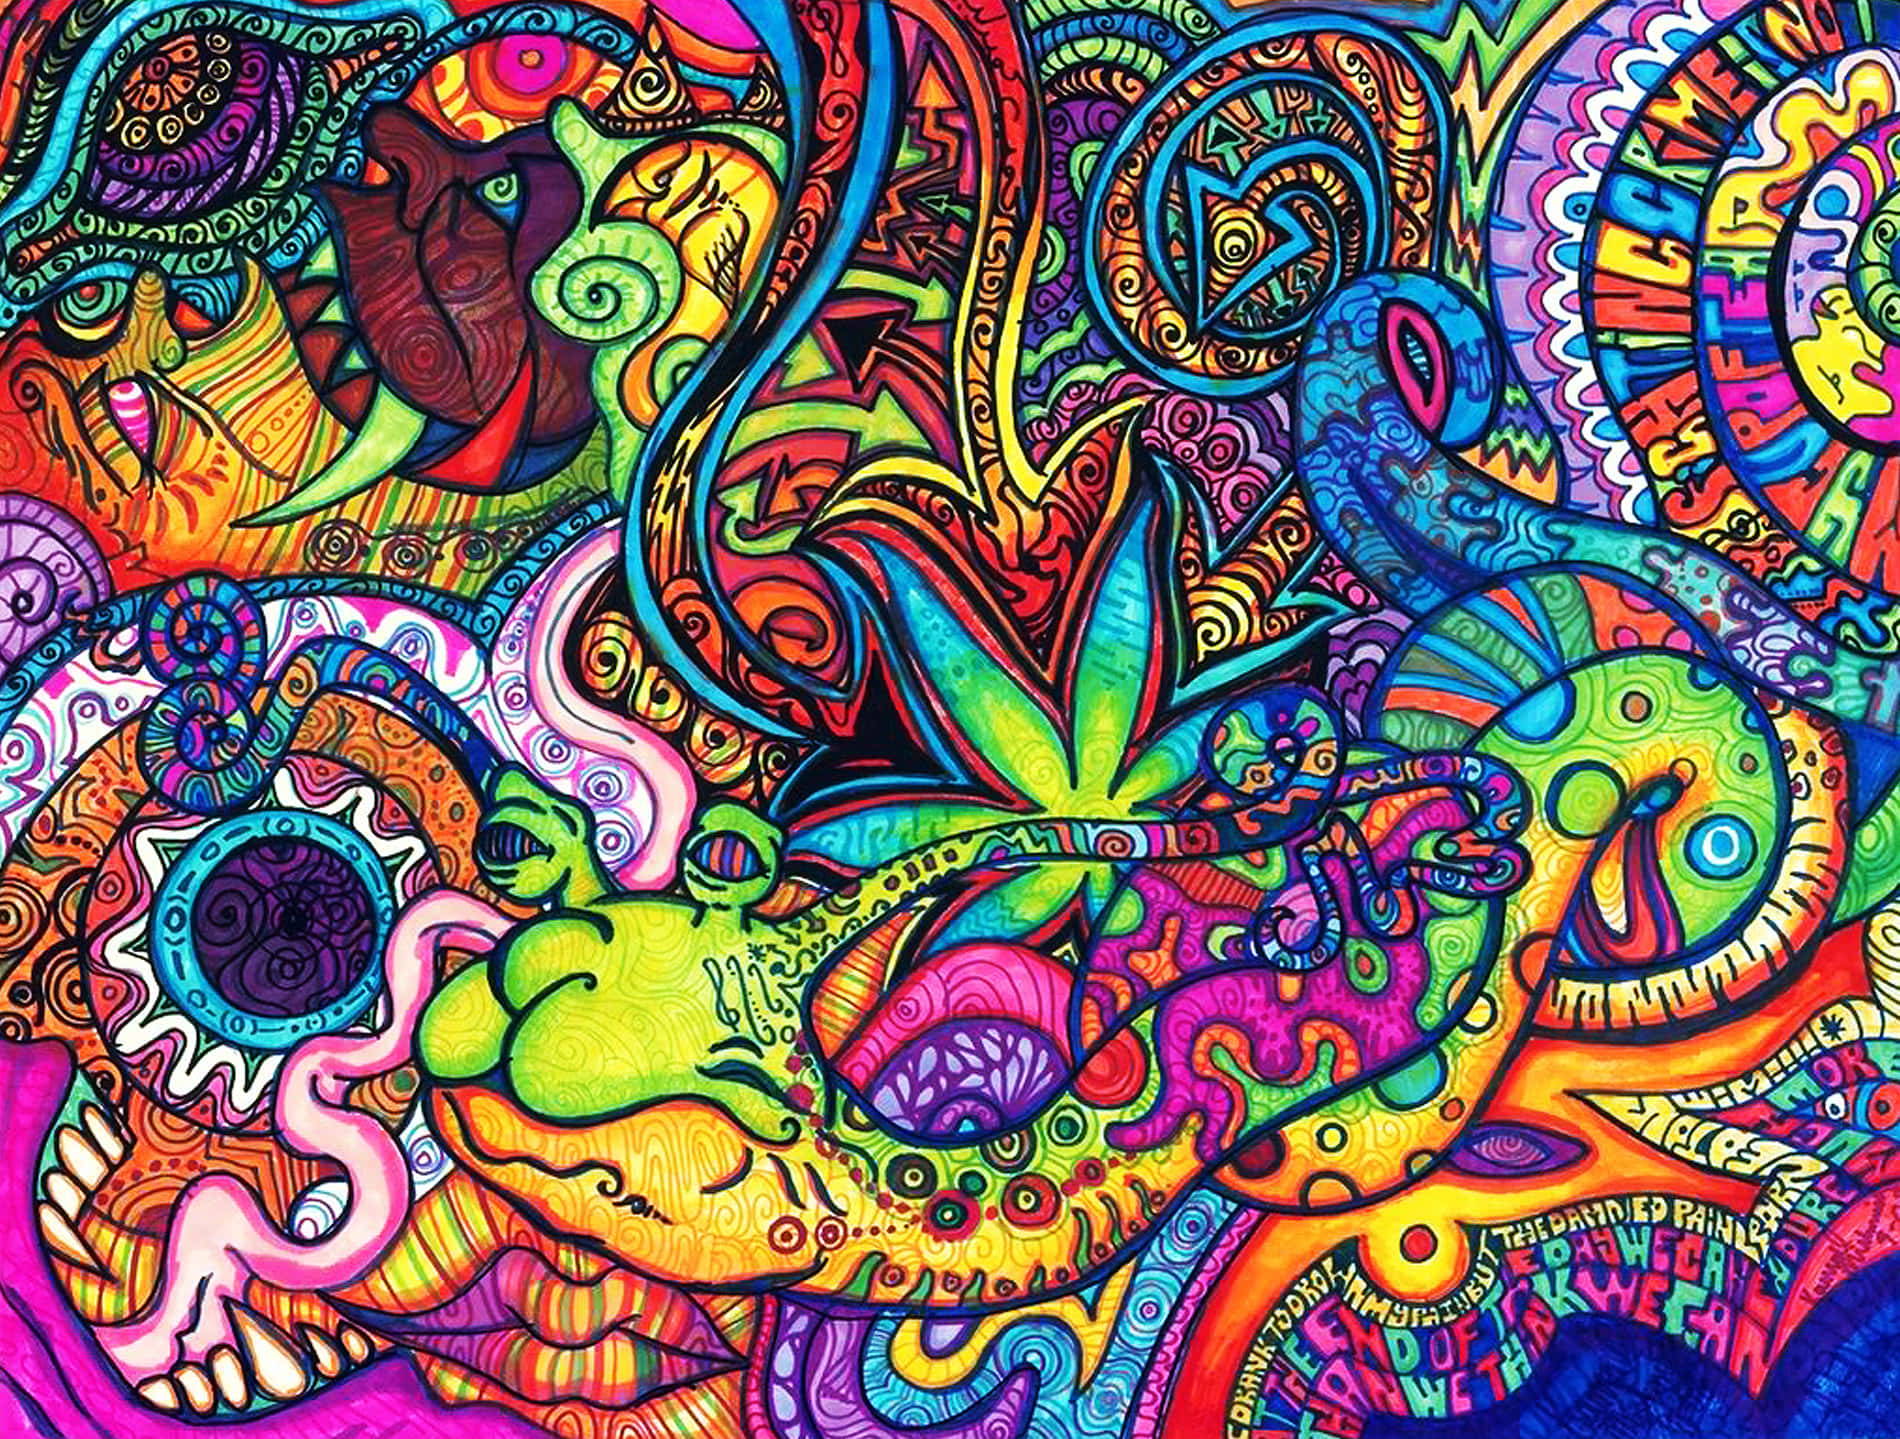 A Colorful Psychedelic Art Piece With A Lot Of Colorful Designs Wallpaper